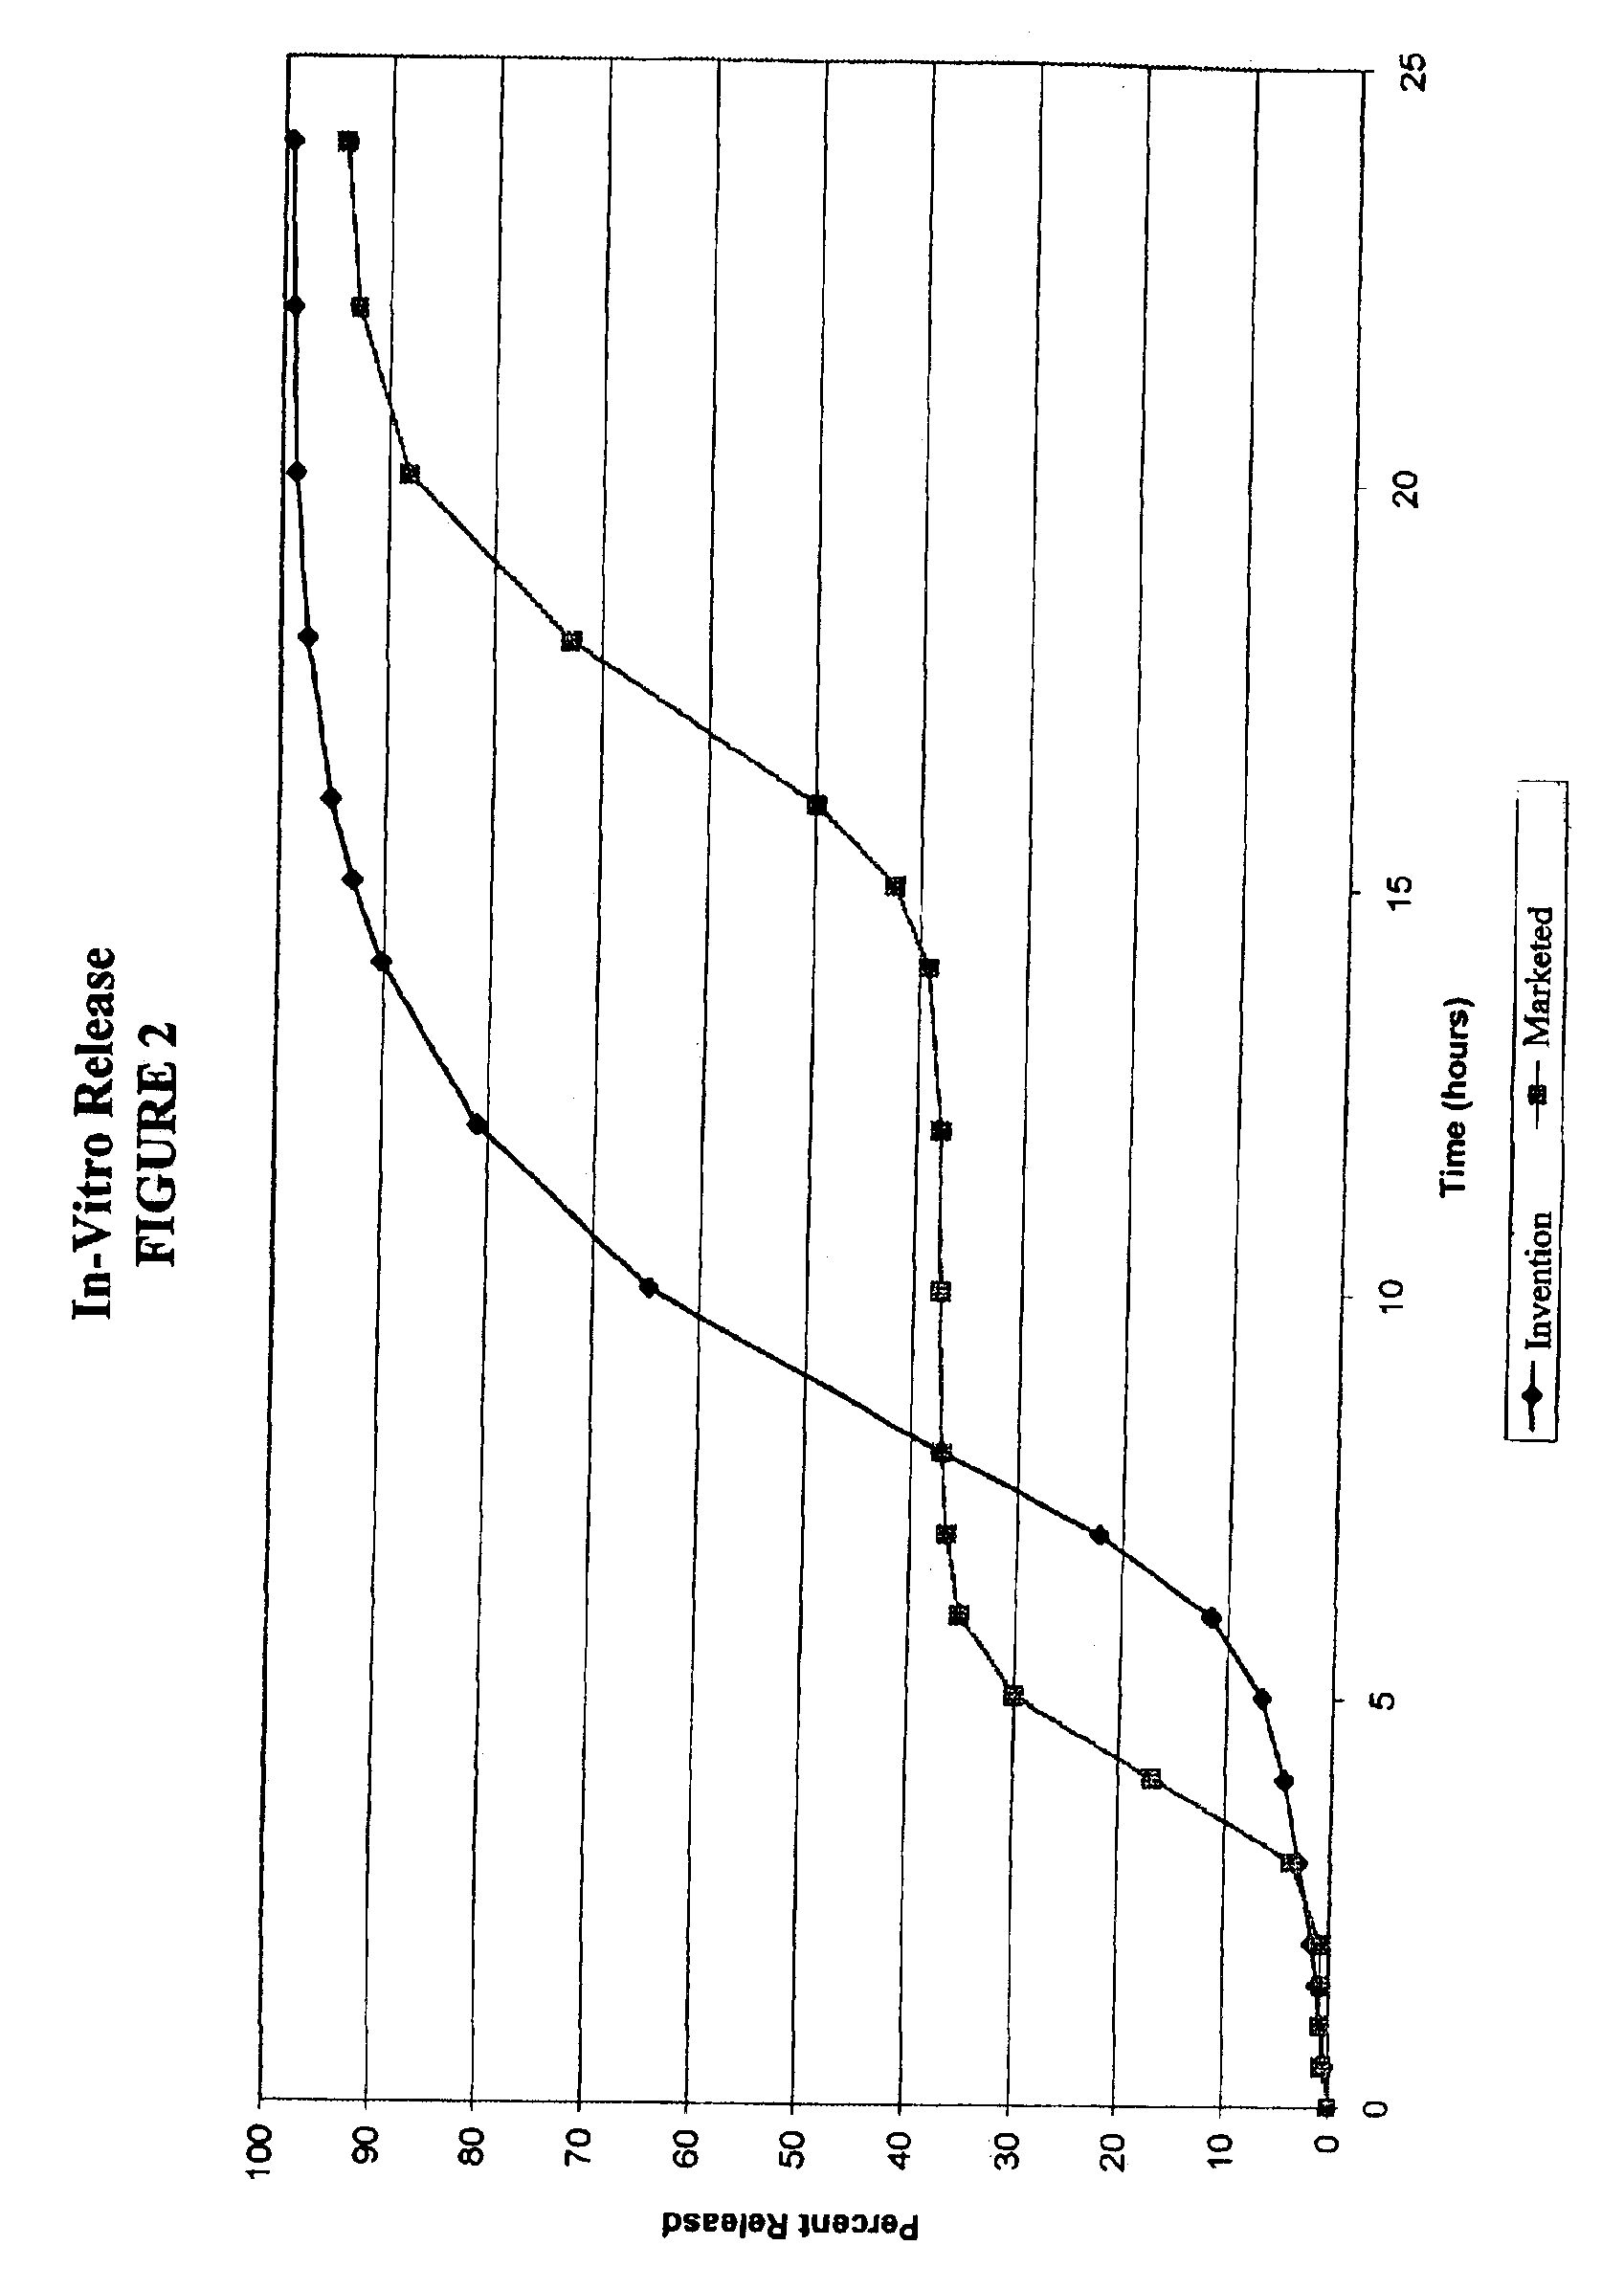 Chrono delivery formulations and method of use thereof